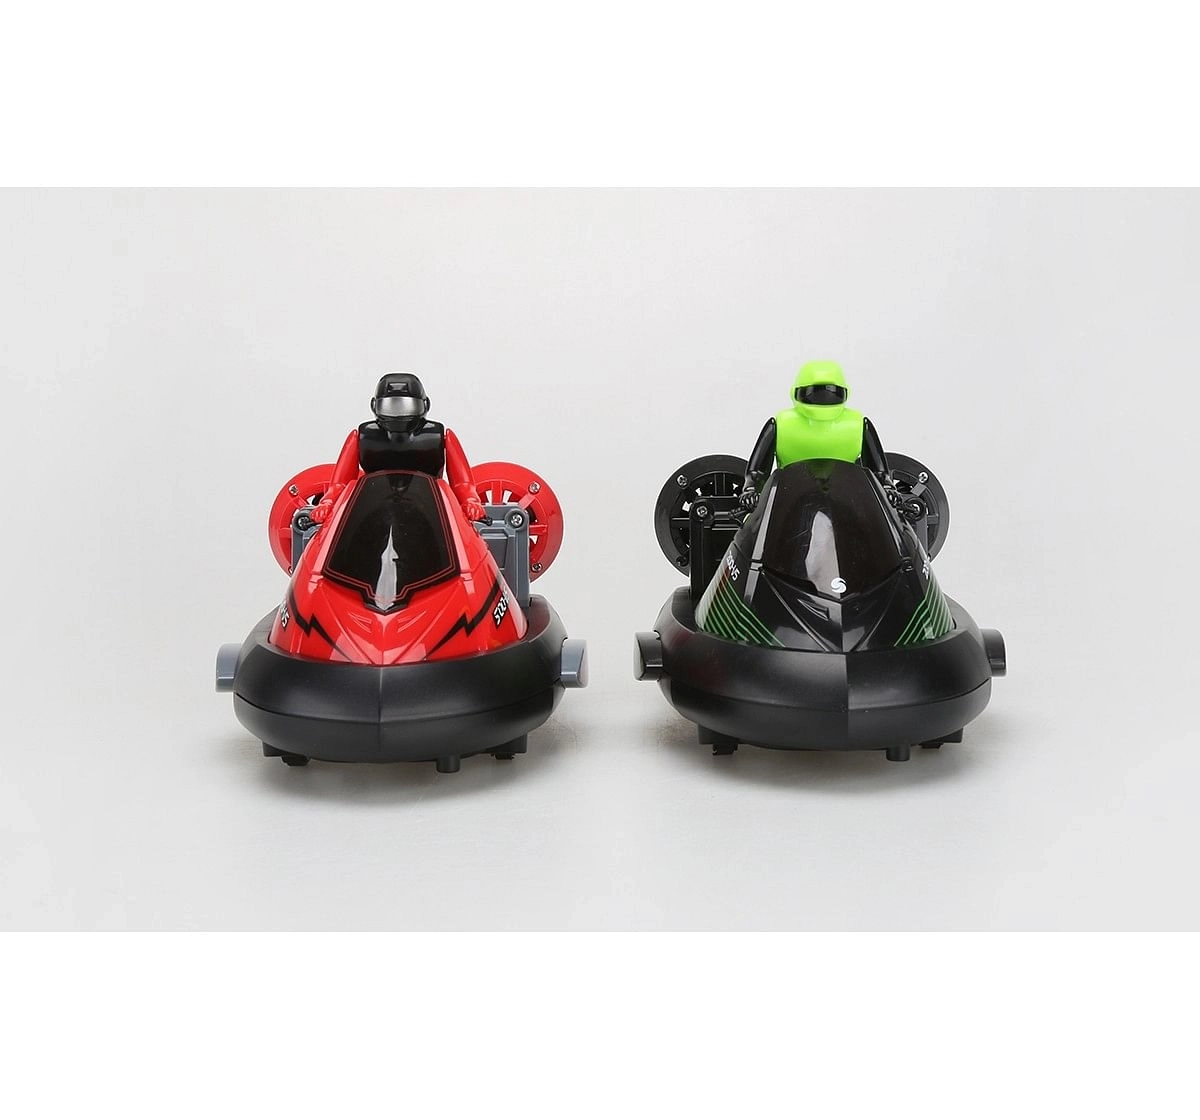 Dihua 2 R/C Bumper Cars with Figure Remote Controlled Toy for Kids age 8Y+ 